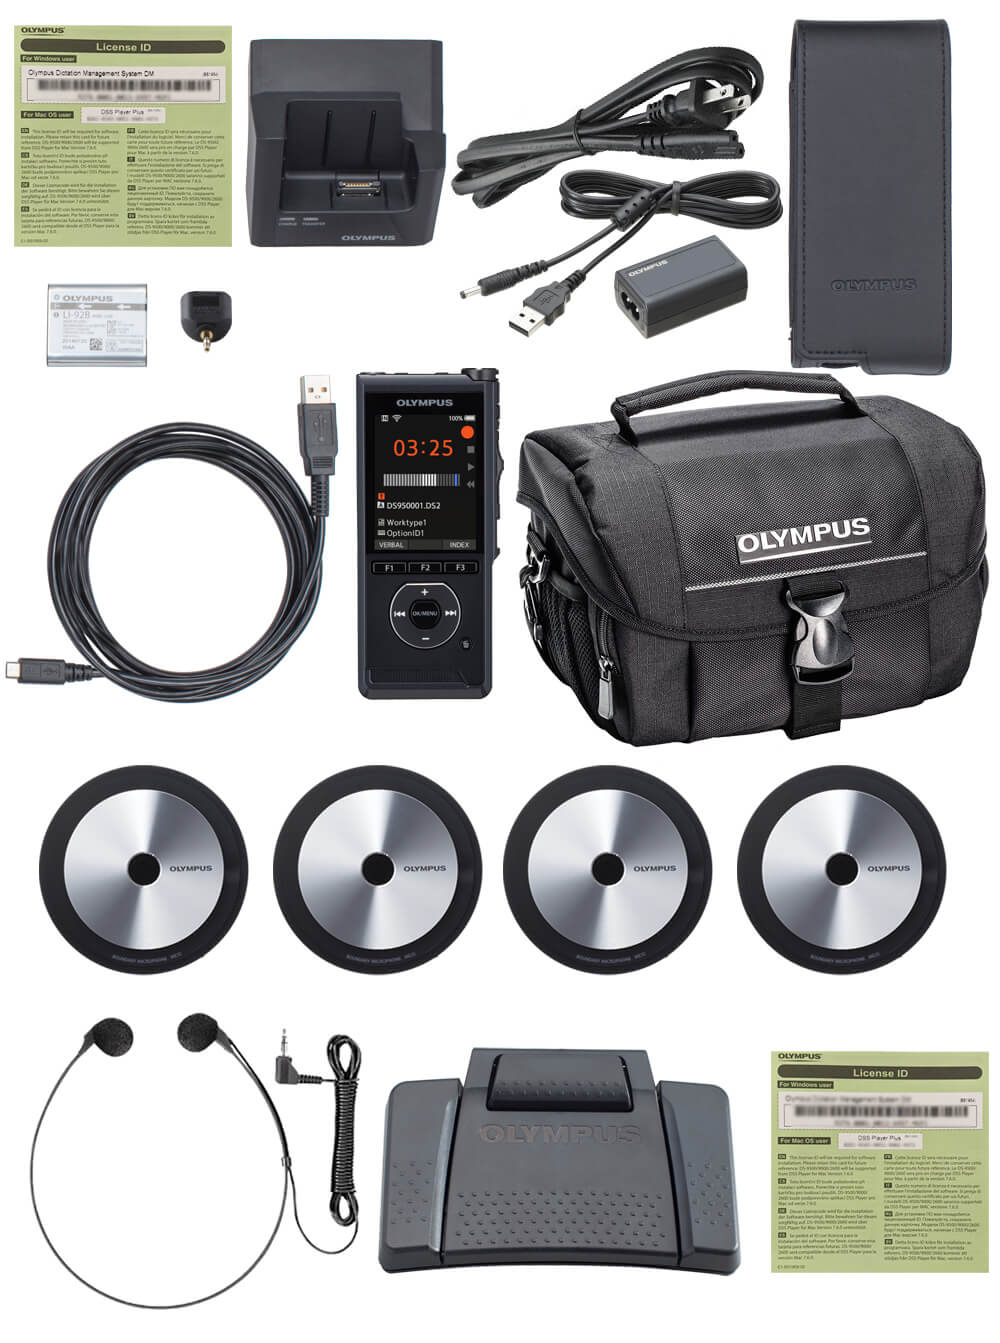 Olympus CRT9500 Conference Recording Kit